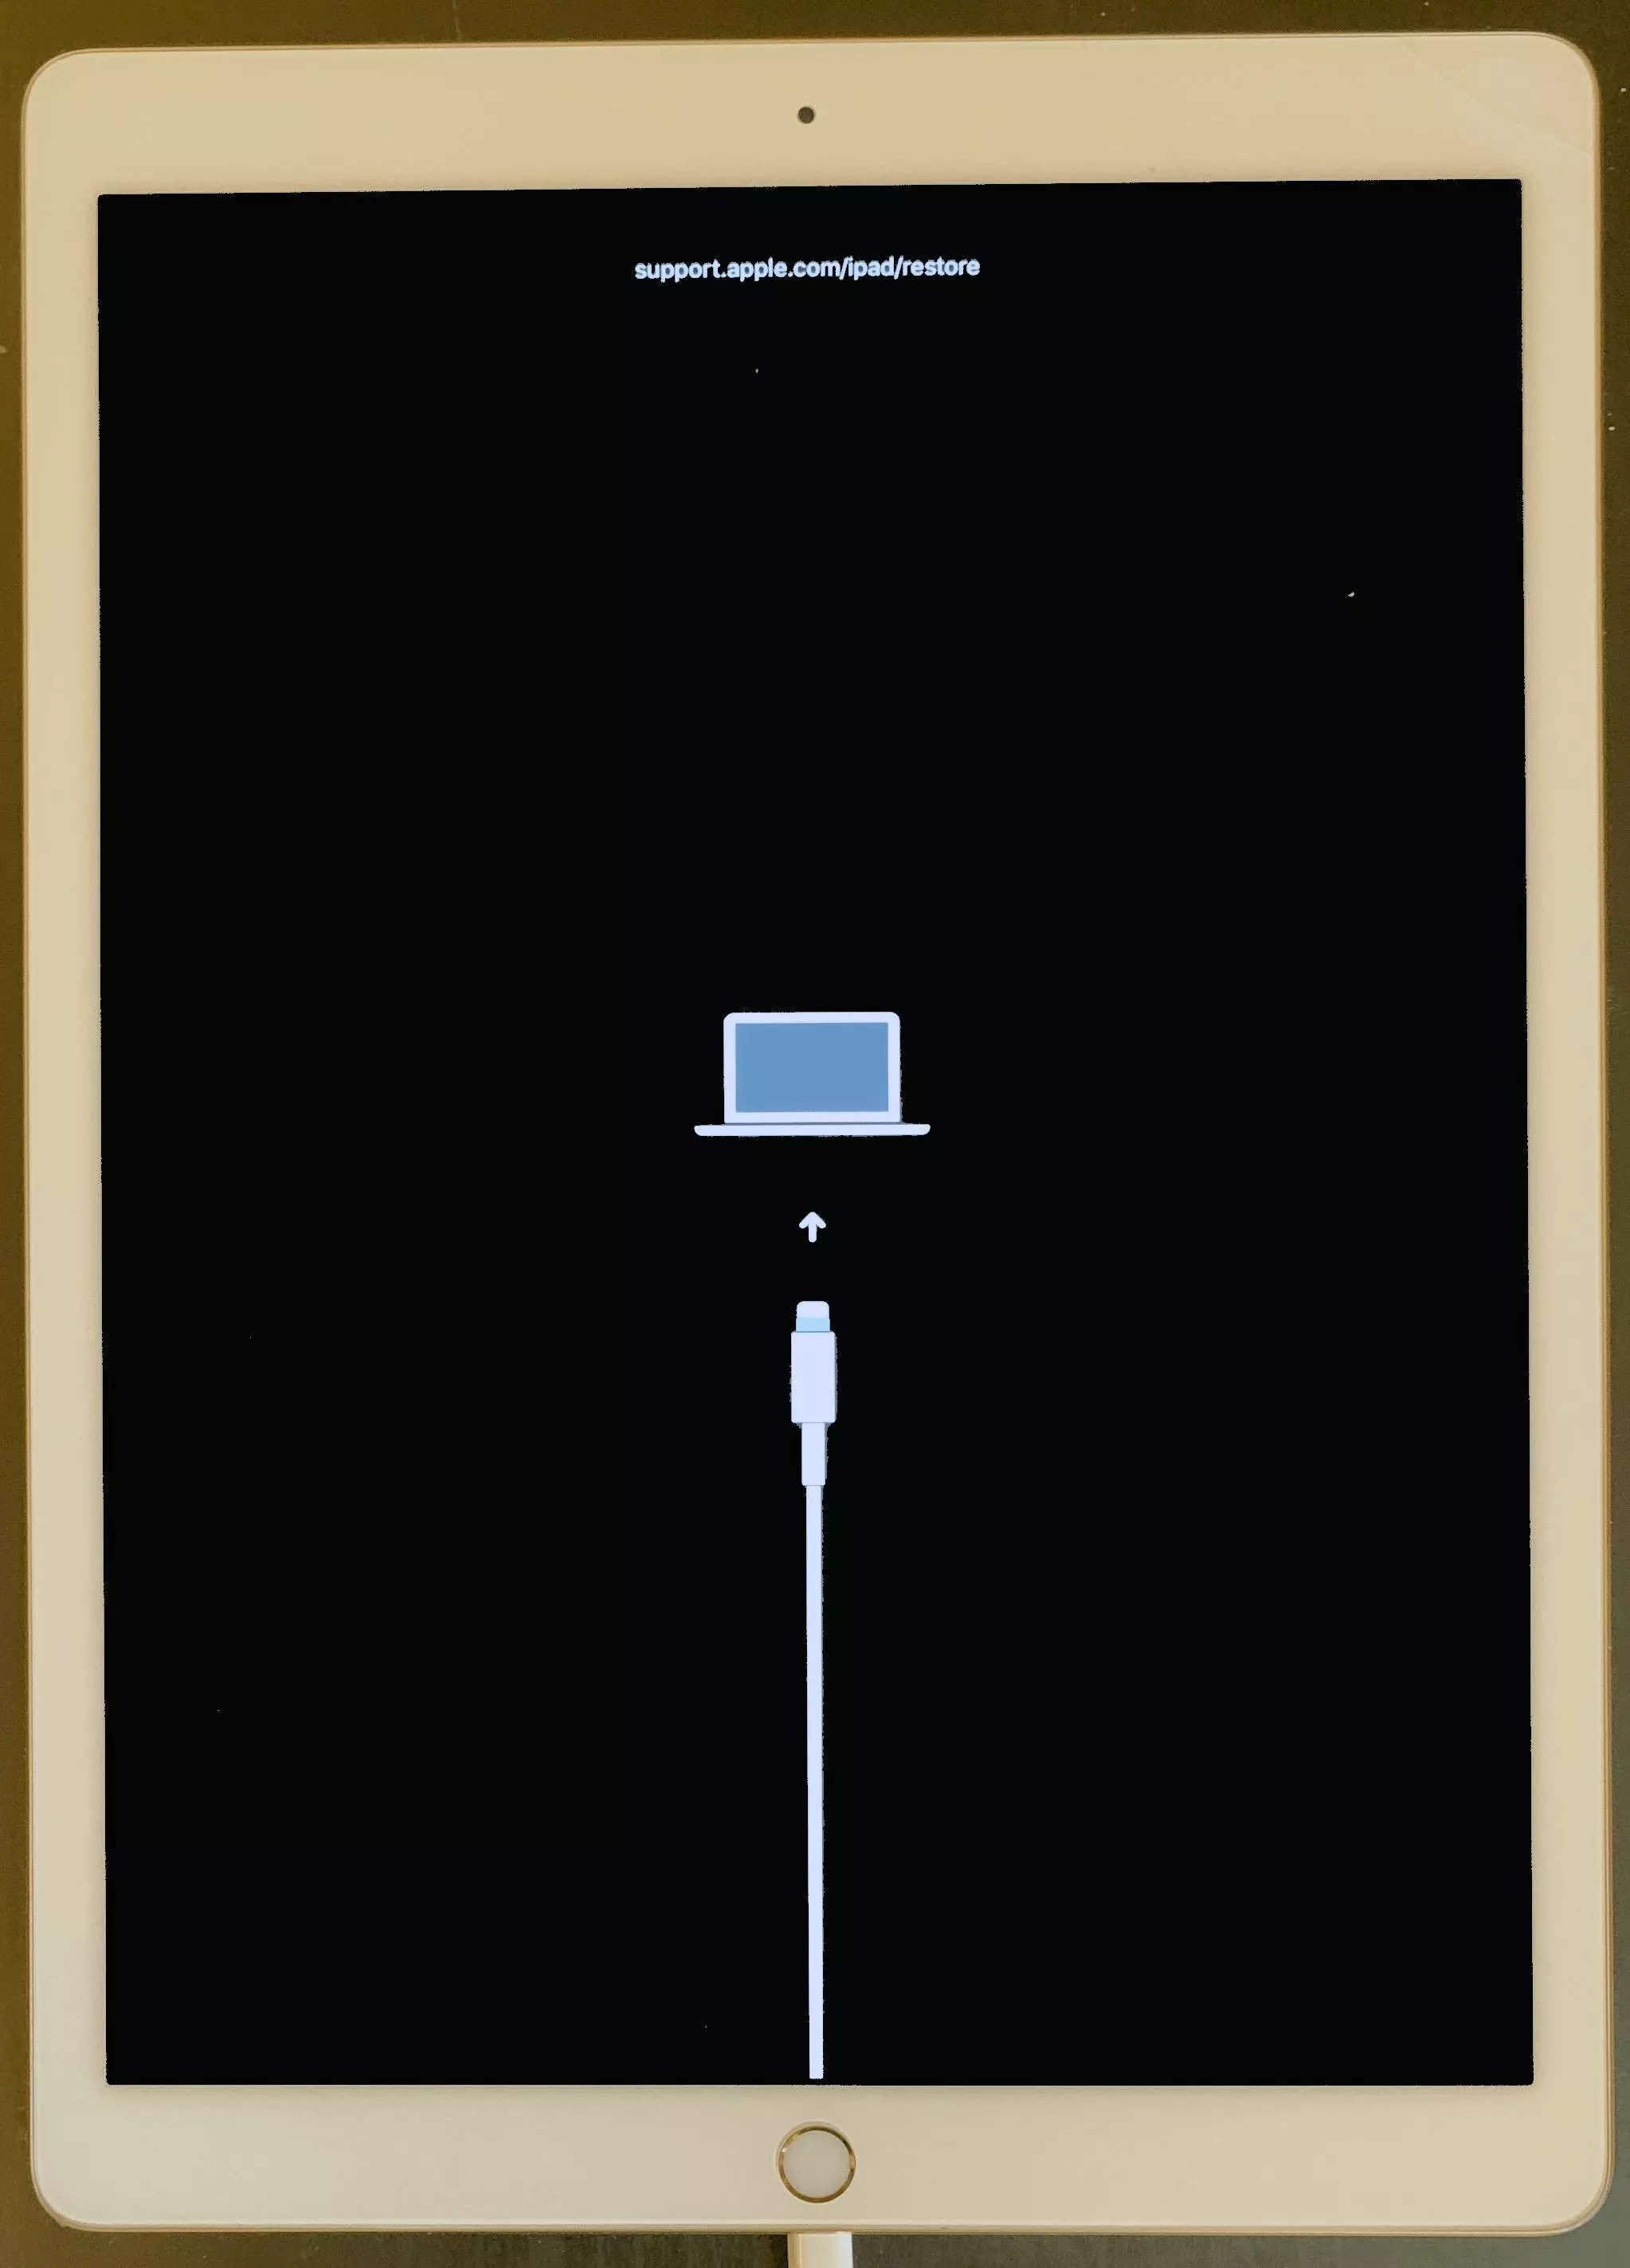 The Recovery Mode screen on an iPad, which displays a link to Apple